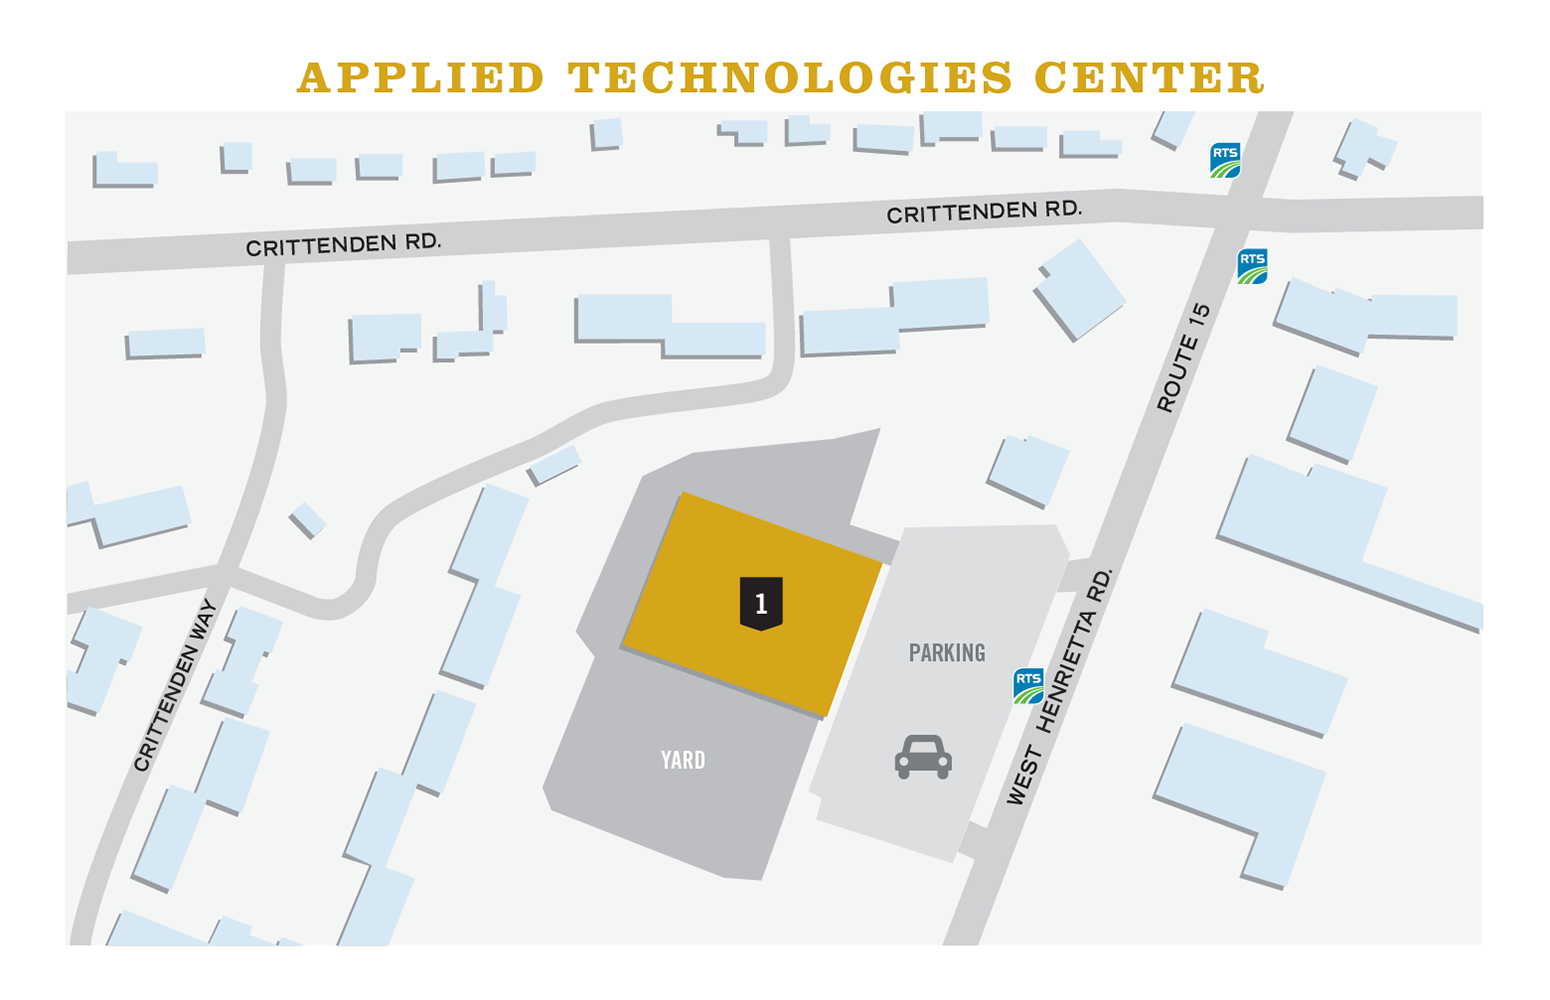 Map of MCC's Applied Technologies Center